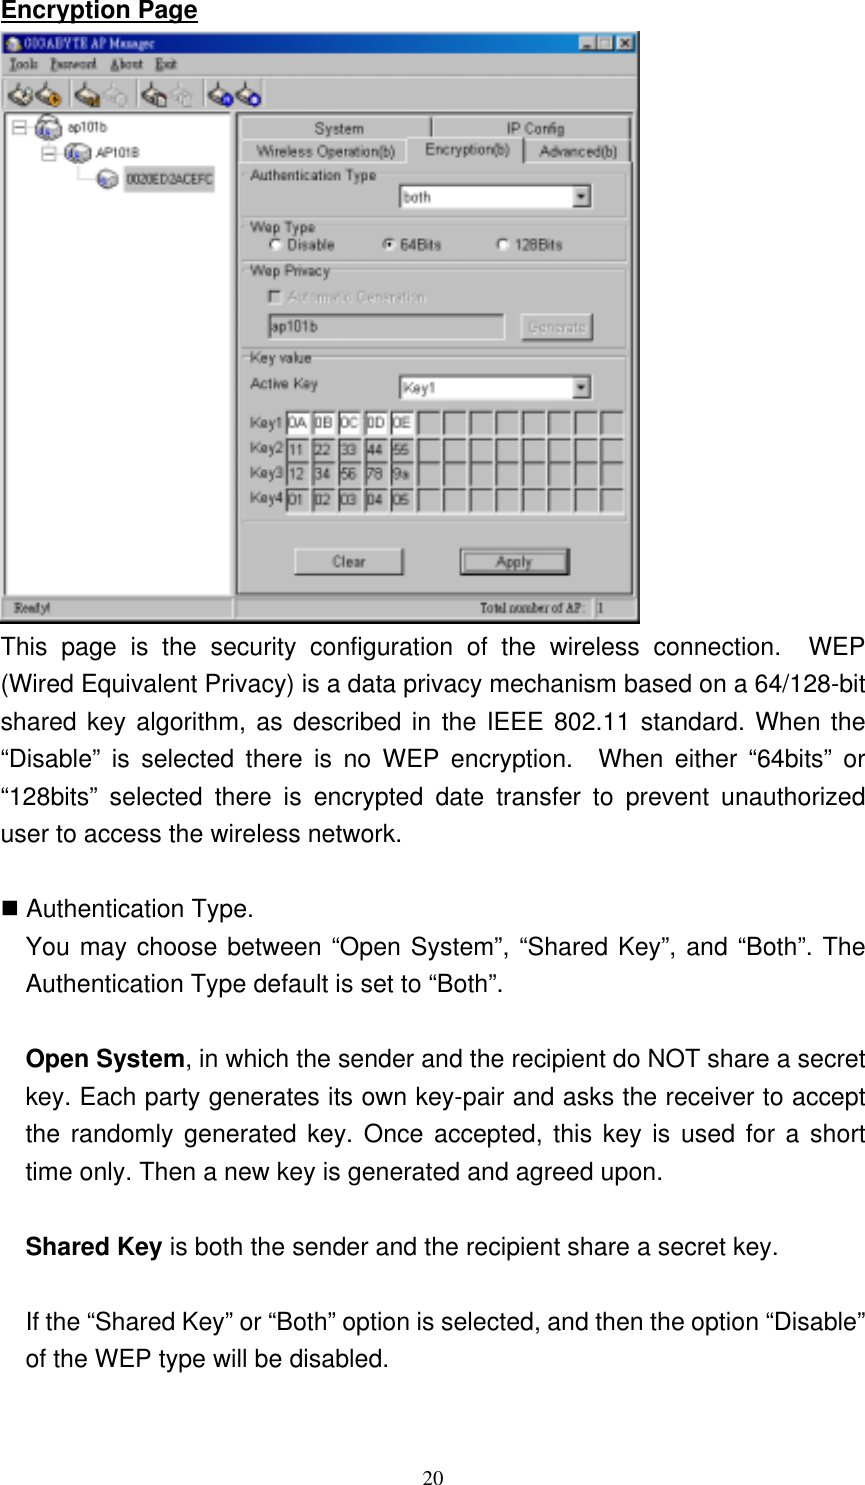 20  Encryption Page  This page is the security configuration of the wireless connection.  WEP (Wired Equivalent Privacy) is a data privacy mechanism based on a 64/128-bit shared key algorithm, as described in the IEEE 802.11 standard. When the “Disable” is selected there is no WEP encryption.  When either “64bits” or “128bits” selected there is encrypted date transfer to prevent unauthorized user to access the wireless network.   Authentication Type. You may choose between “Open System”, “Shared Key”, and “Both”. The Authentication Type default is set to “Both”.  Open System, in which the sender and the recipient do NOT share a secret key. Each party generates its own key-pair and asks the receiver to accept the randomly generated key. Once accepted, this key is used for a short time only. Then a new key is generated and agreed upon.    Shared Key is both the sender and the recipient share a secret key.  If the “Shared Key” or “Both” option is selected, and then the option “Disable” of the WEP type will be disabled.    